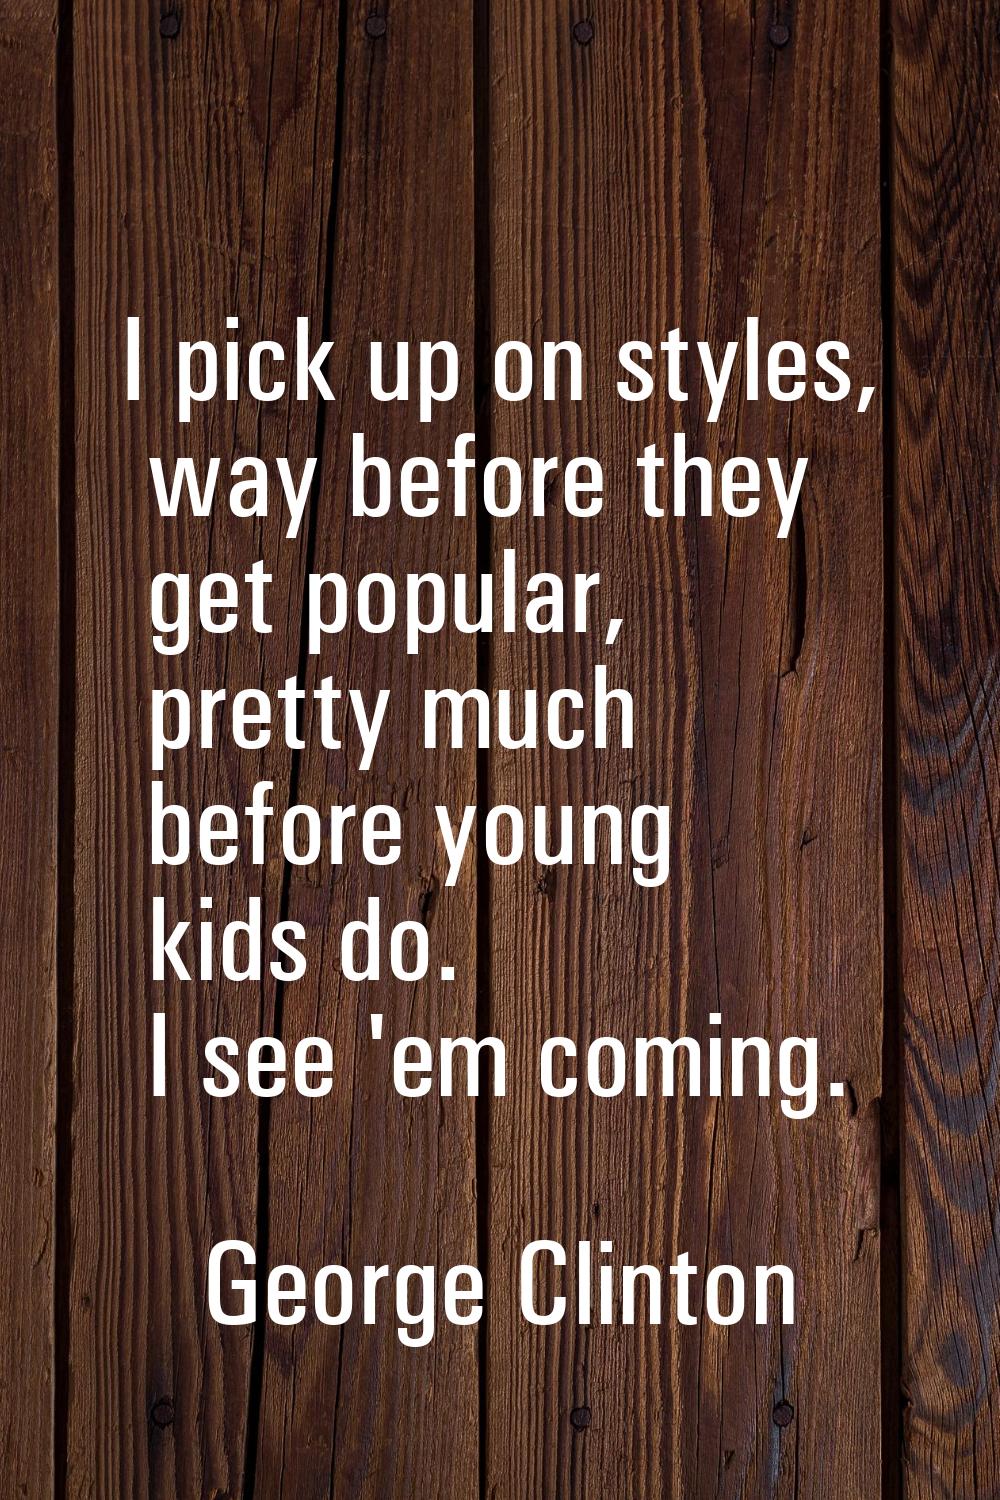 I pick up on styles, way before they get popular, pretty much before young kids do. I see 'em comin